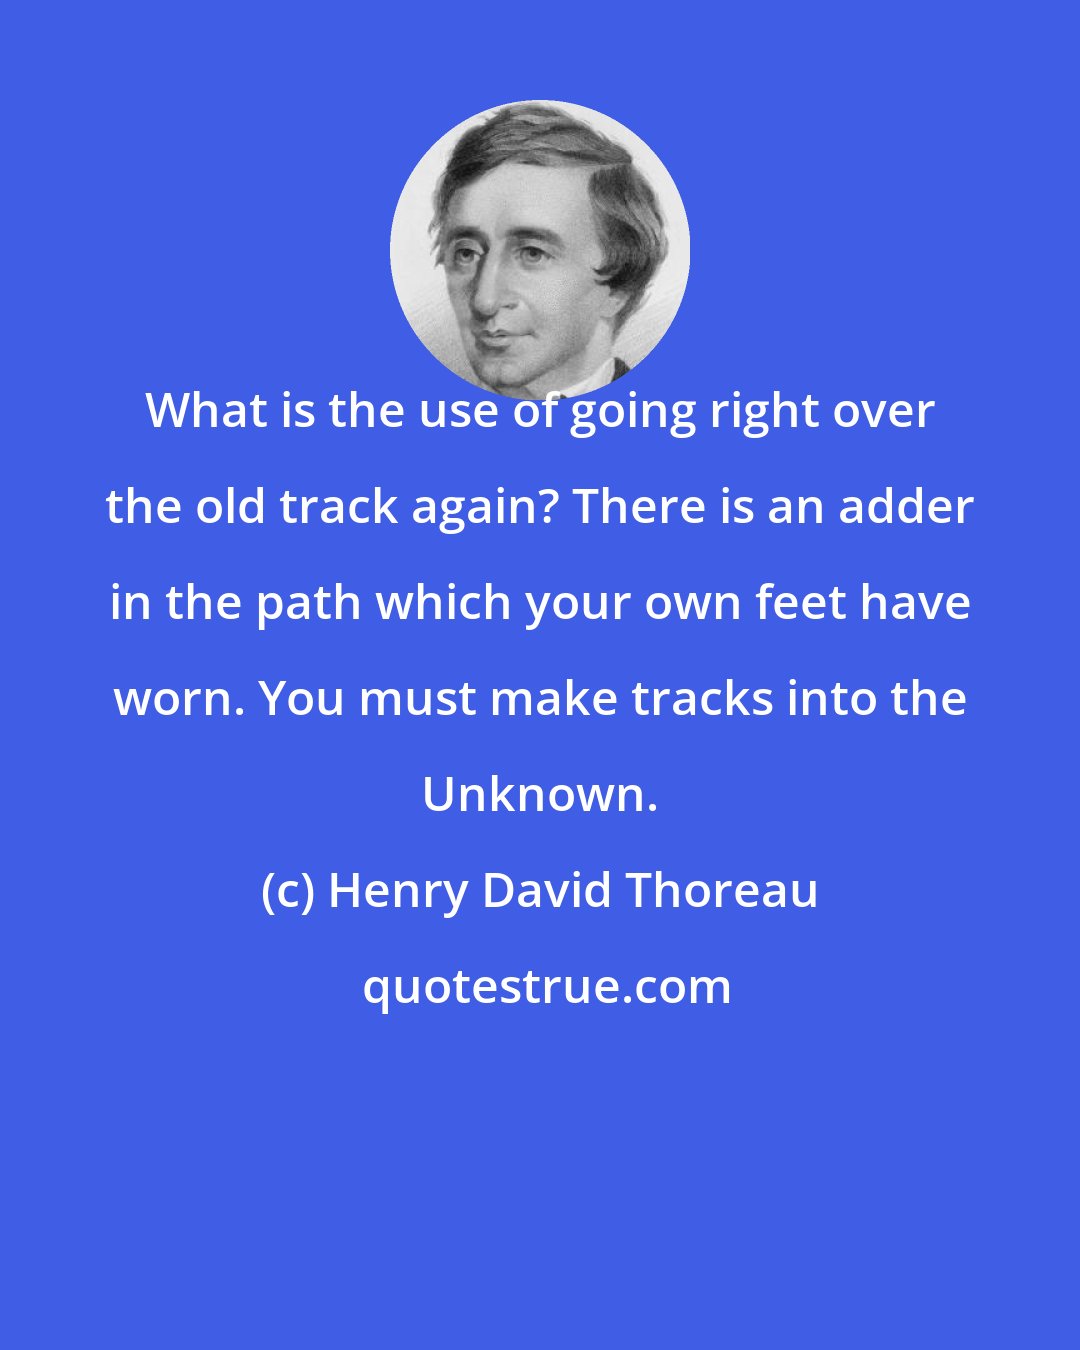 Henry David Thoreau: What is the use of going right over the old track again? There is an adder in the path which your own feet have worn. You must make tracks into the Unknown.